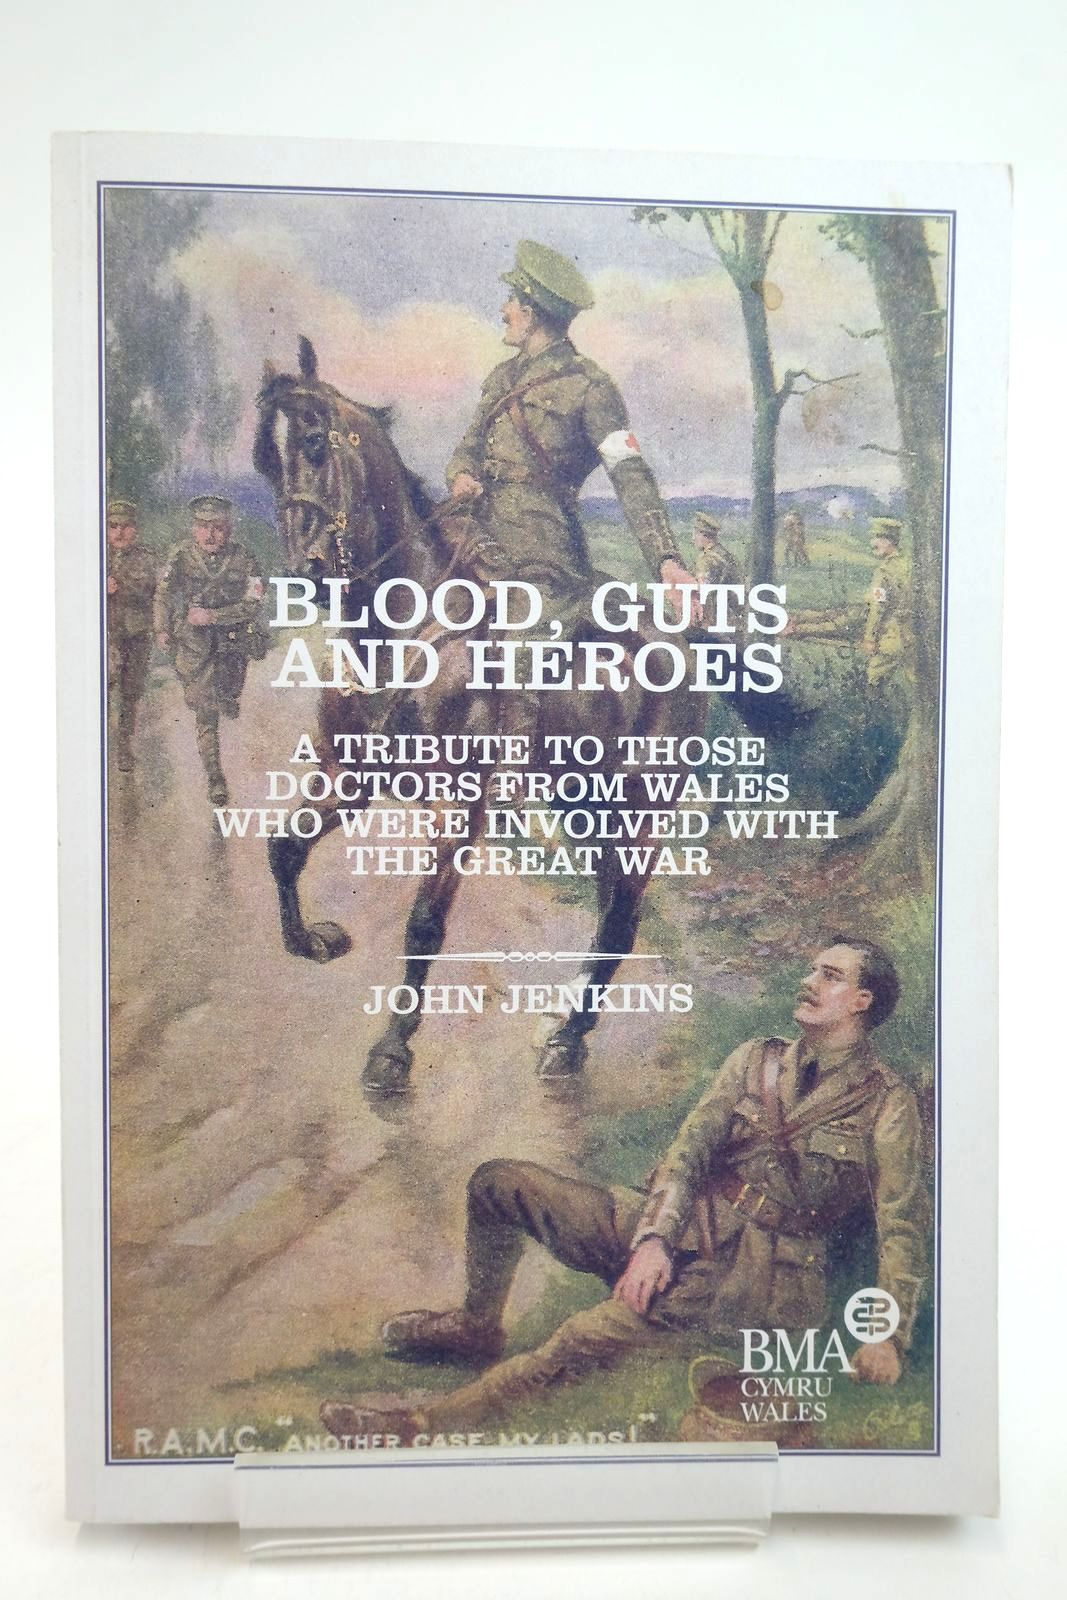 Photo of BLOOD, GUTS AND HEROES: A TRIBUTE TO THOSE DOCTORS FROM WALES WHO WERE INVOLVED WITH THE GREAT WAR written by Jenkins, John published by Bma Cymru Wales (STOCK CODE: 2140001)  for sale by Stella & Rose's Books